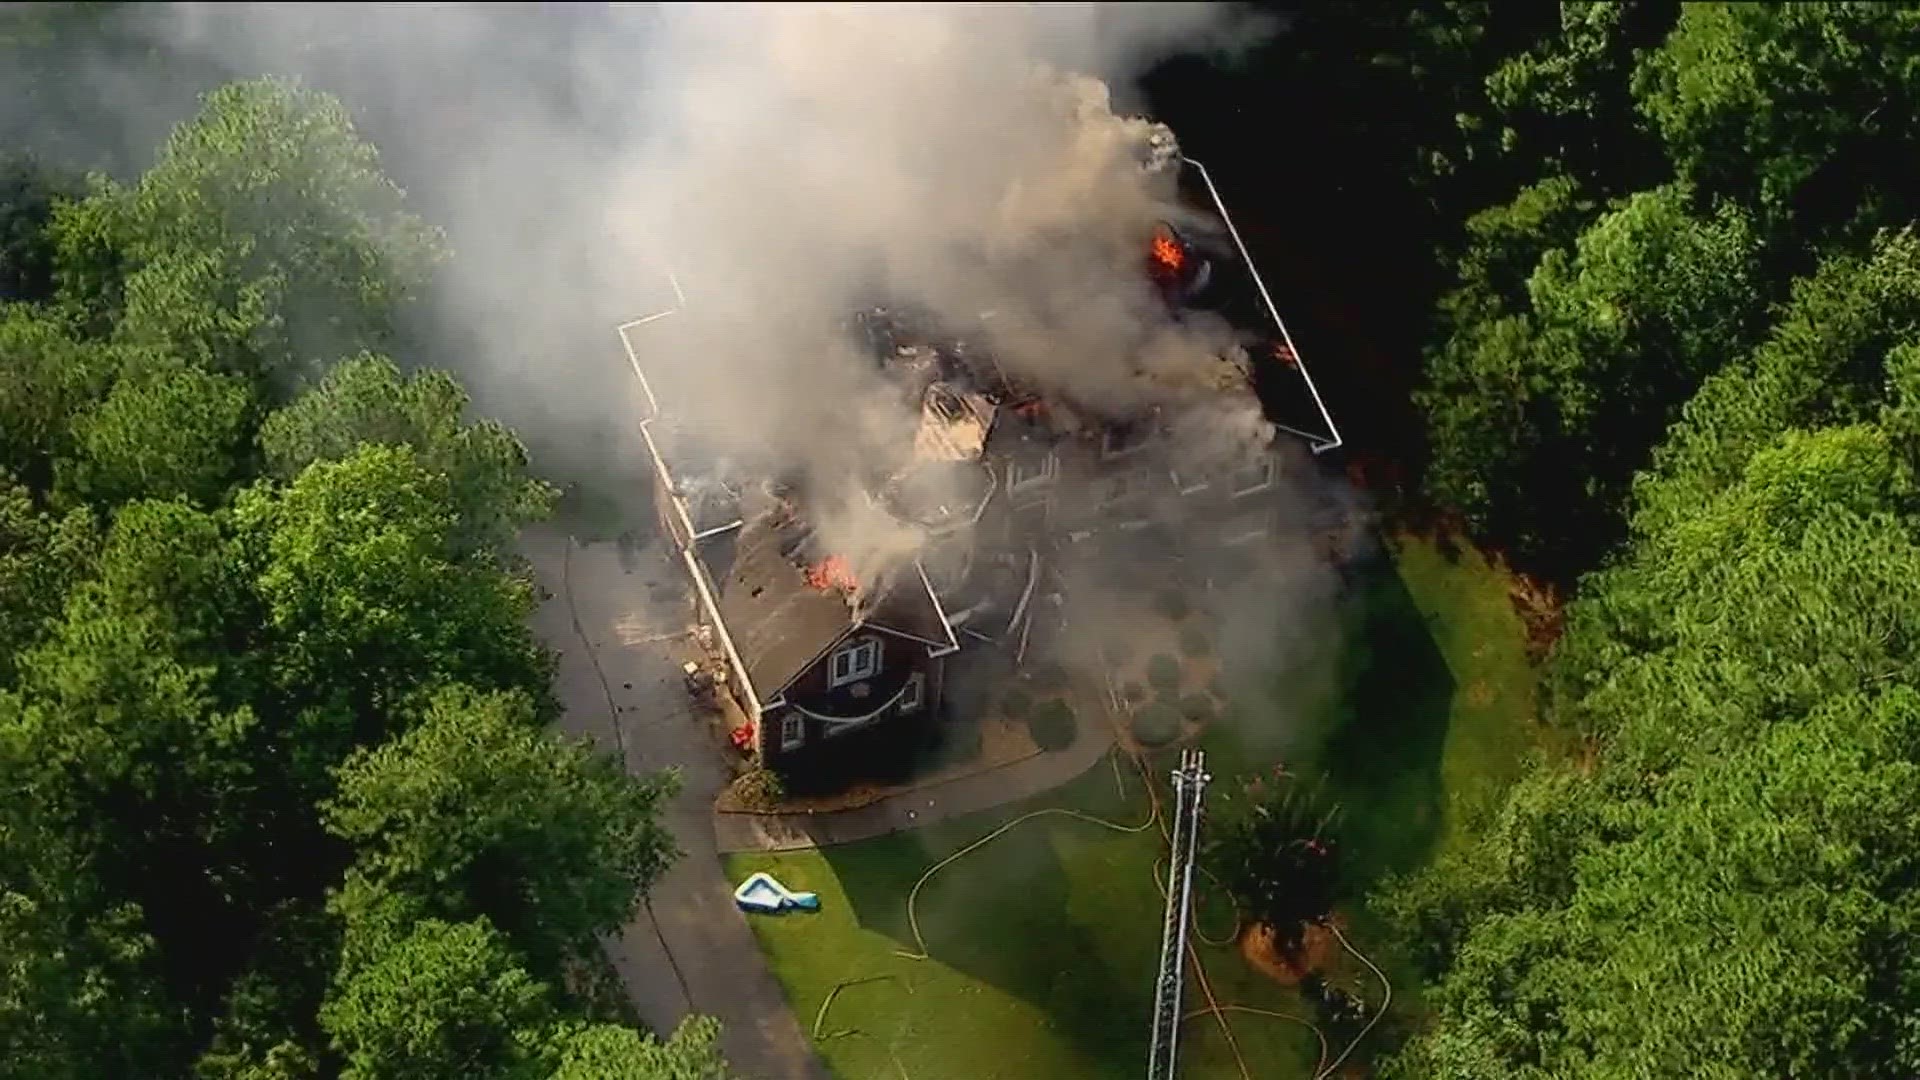 Flames and smoke can be seen coming out of the home on Demooney Road.